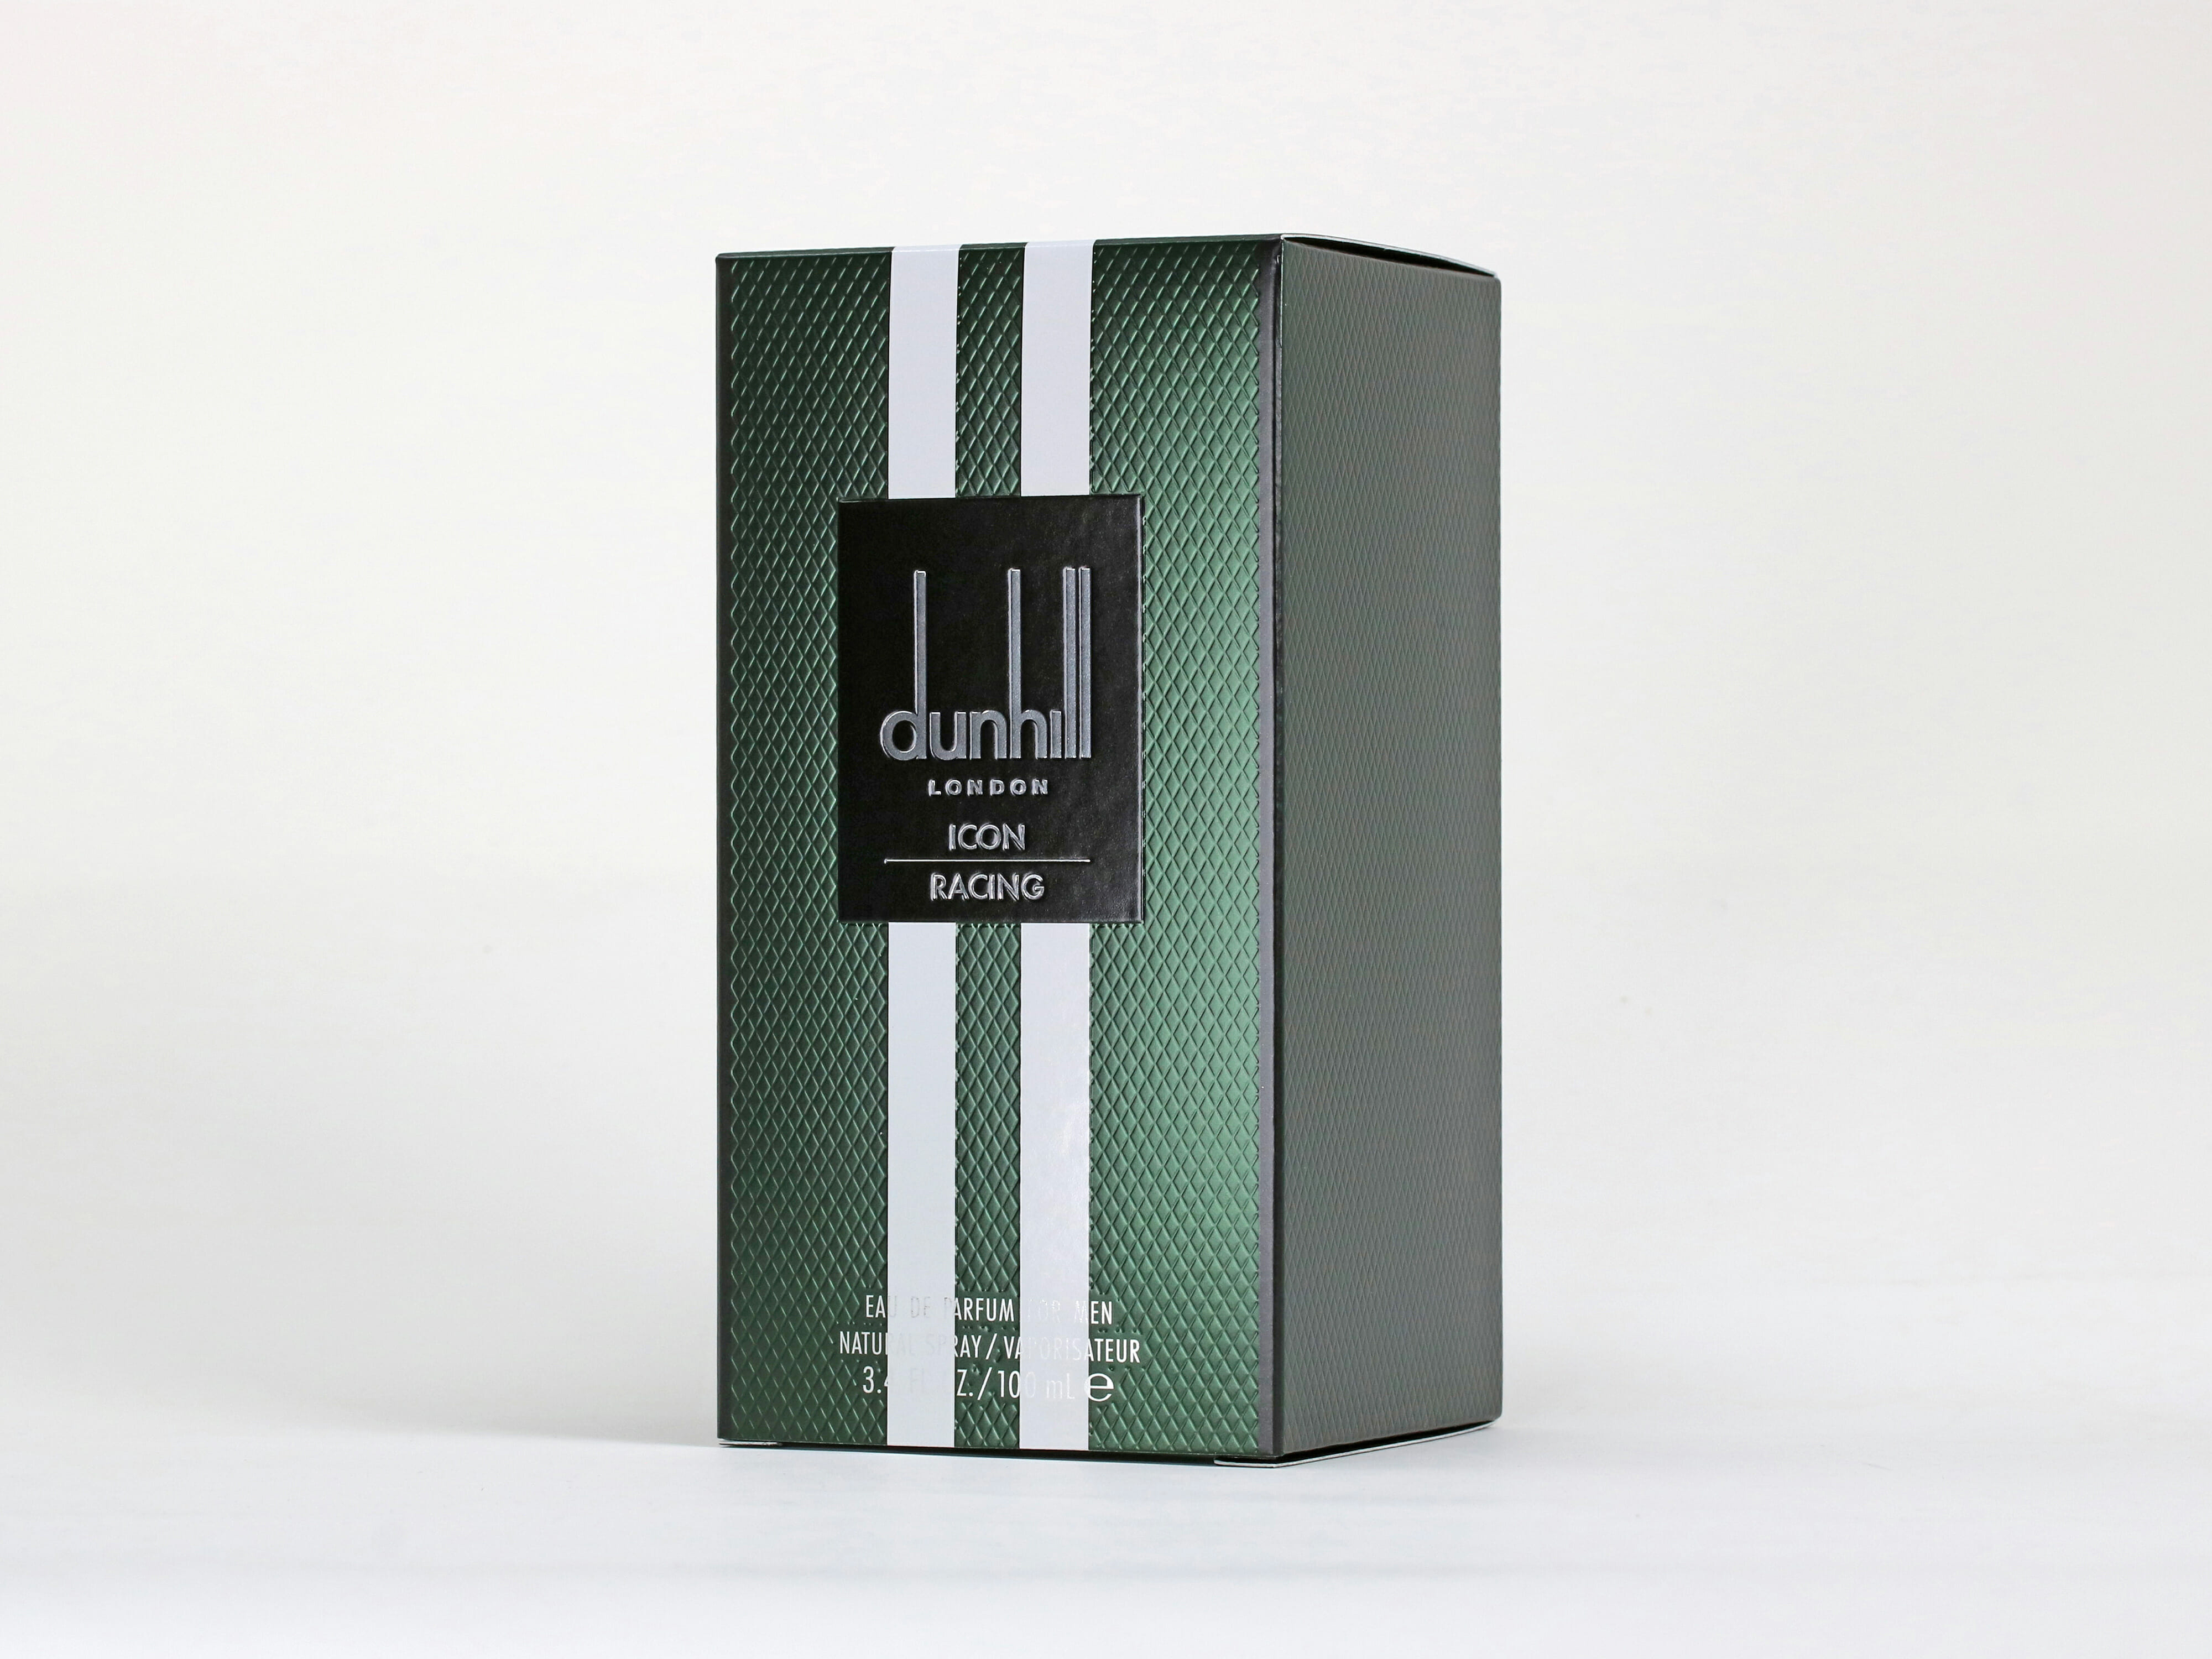 Dunhill-Icon-Racing-300dpi-